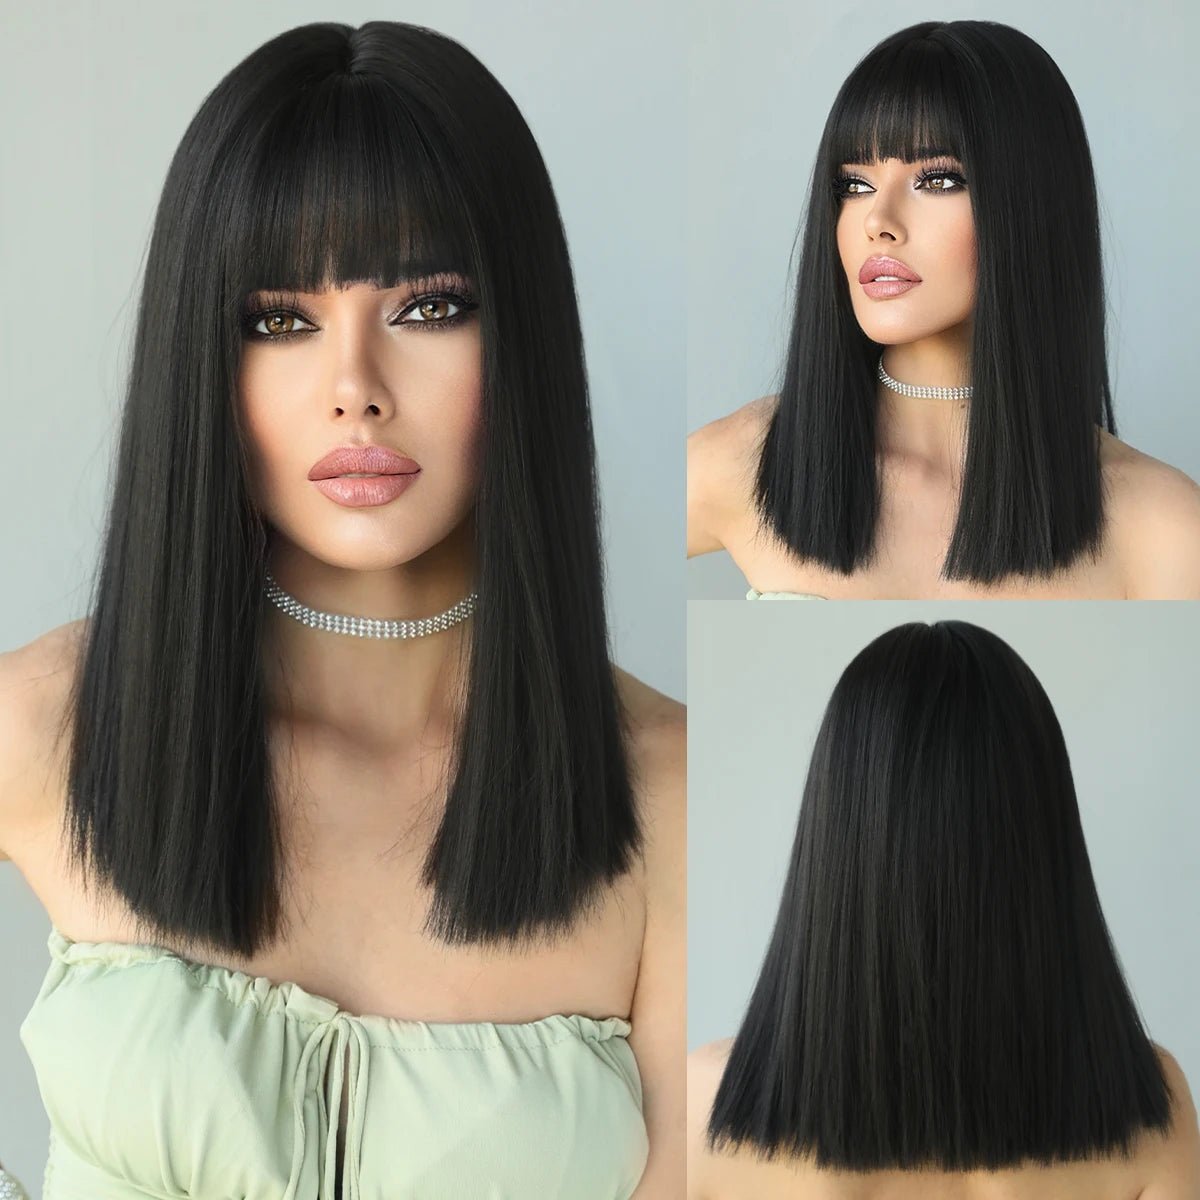 Black Straight with Bangs Synthetic Wigs - HairNjoy